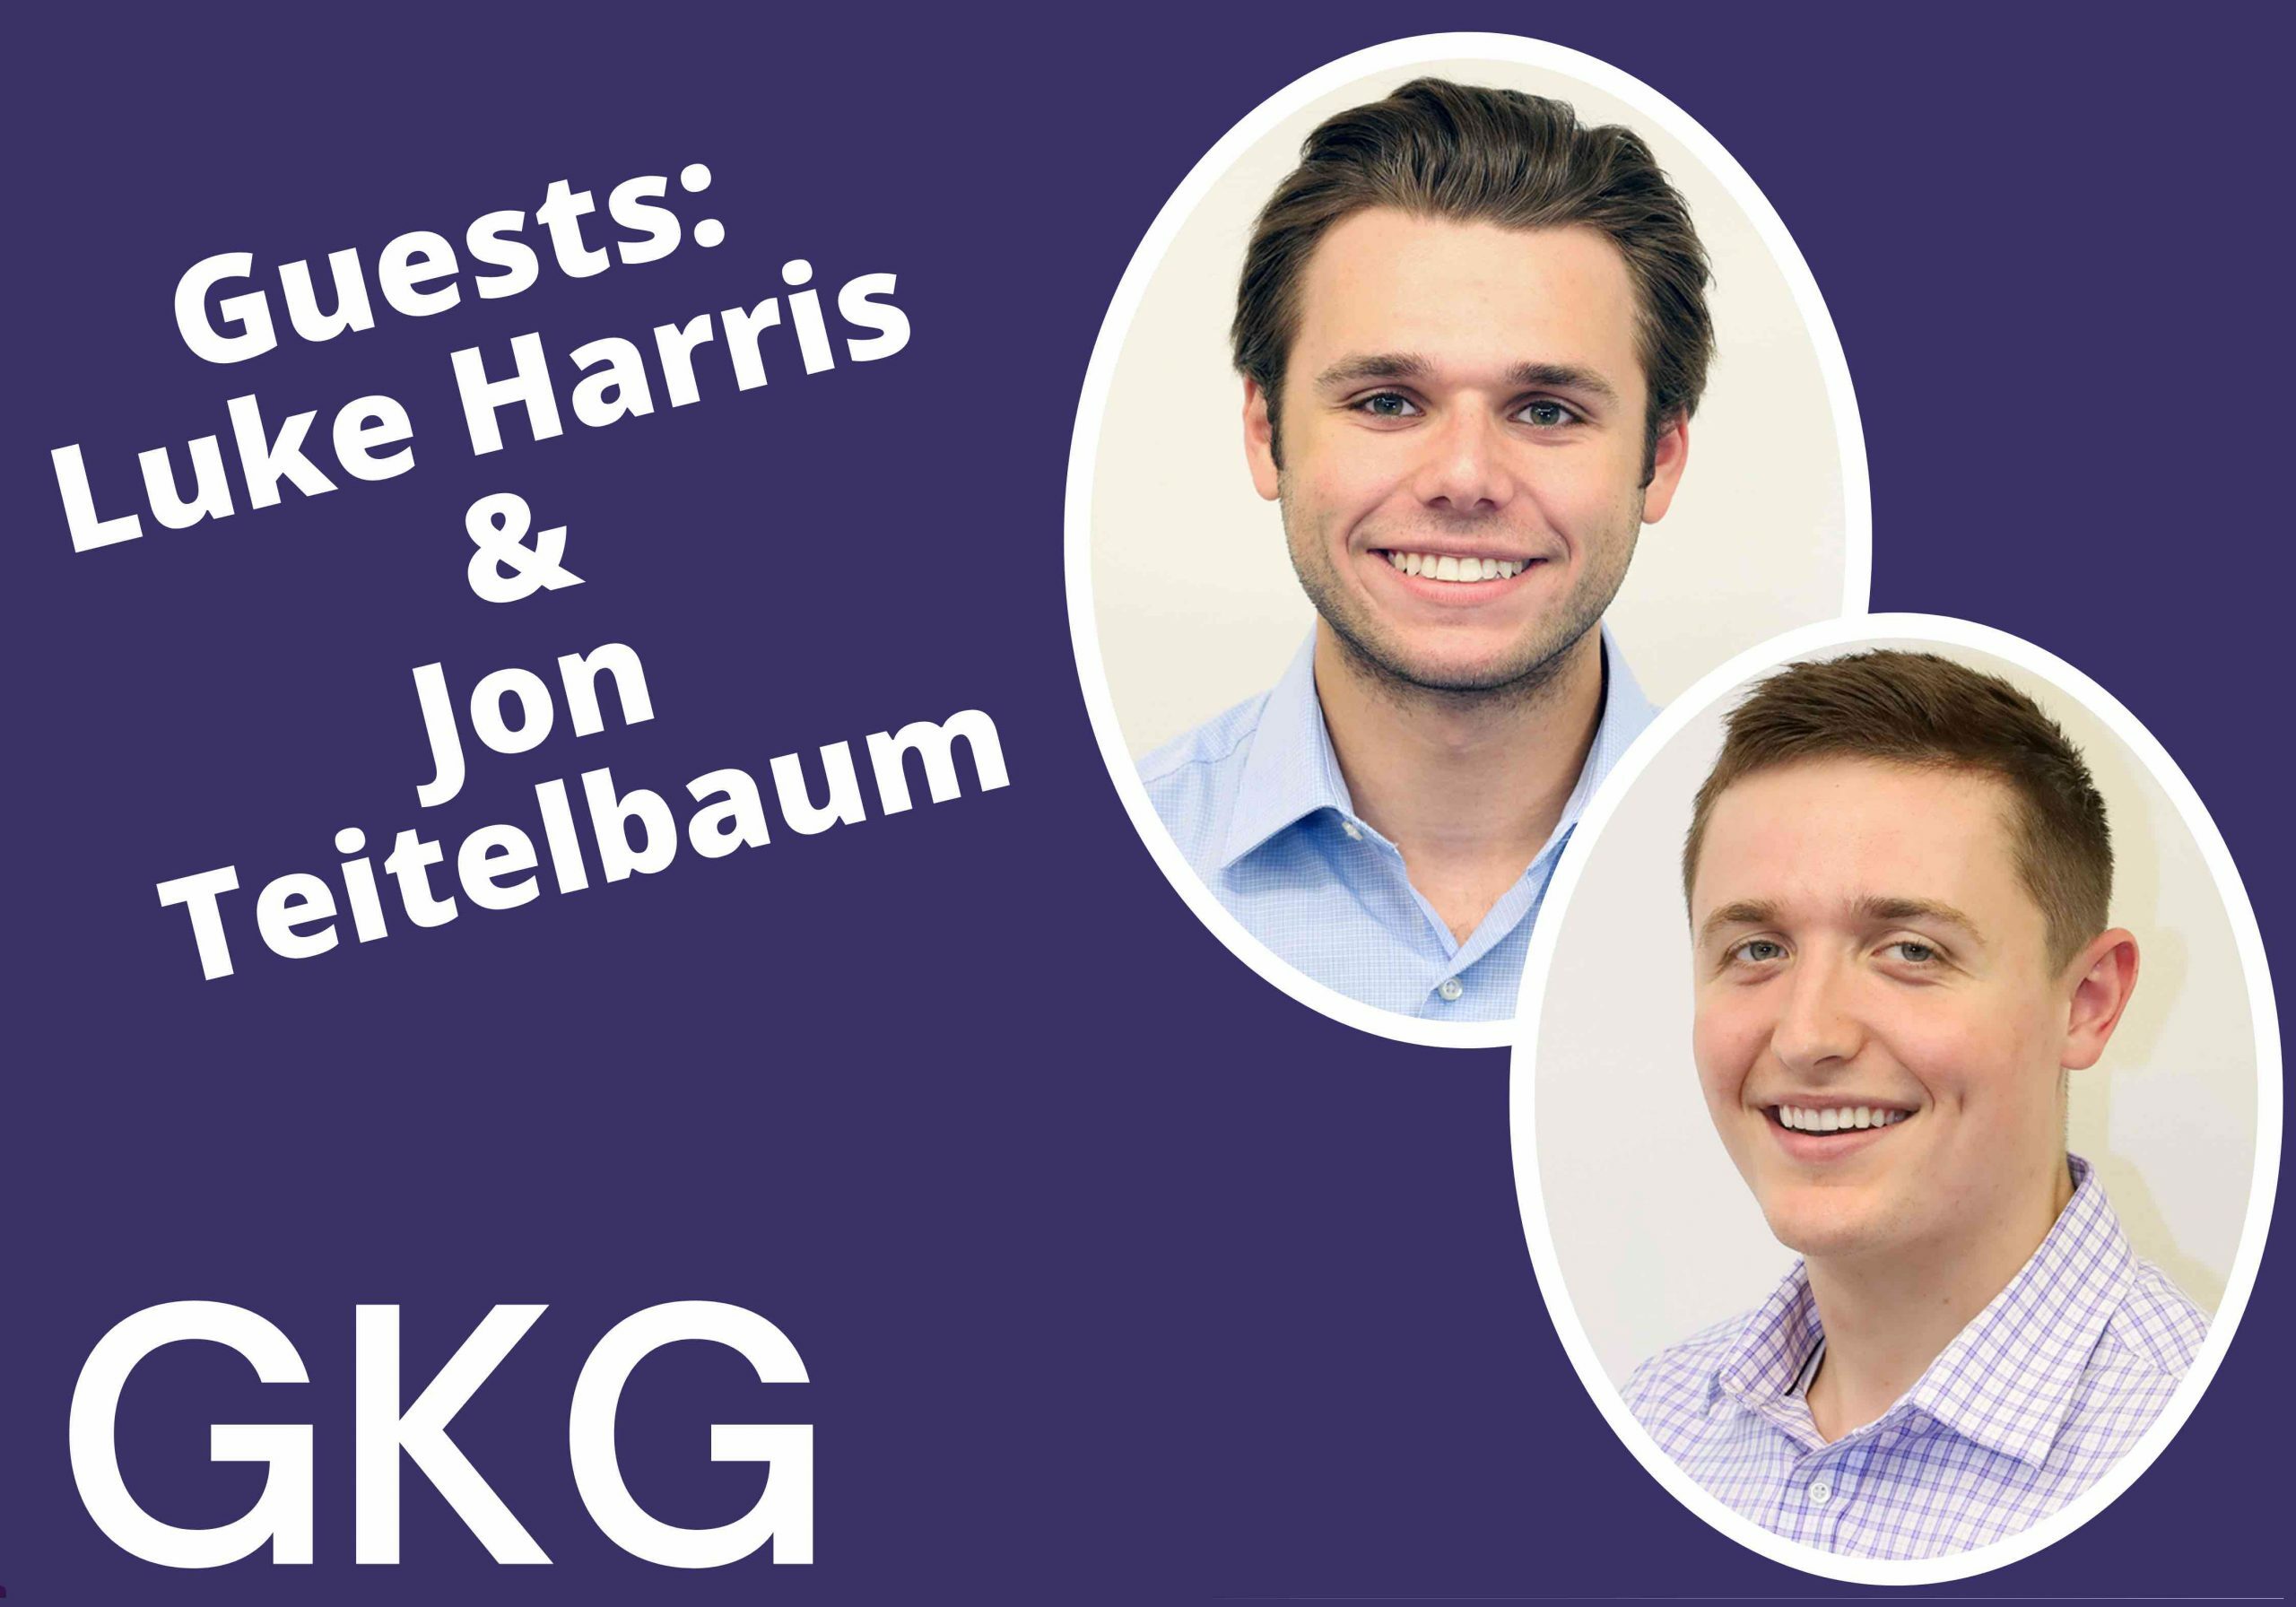 Promotional image featuring portraits of two smiling men, Luke Harris and Jon Teitelbaum, with "Human Resources guests" text and the acronym "GKG" in purple at the bottom.